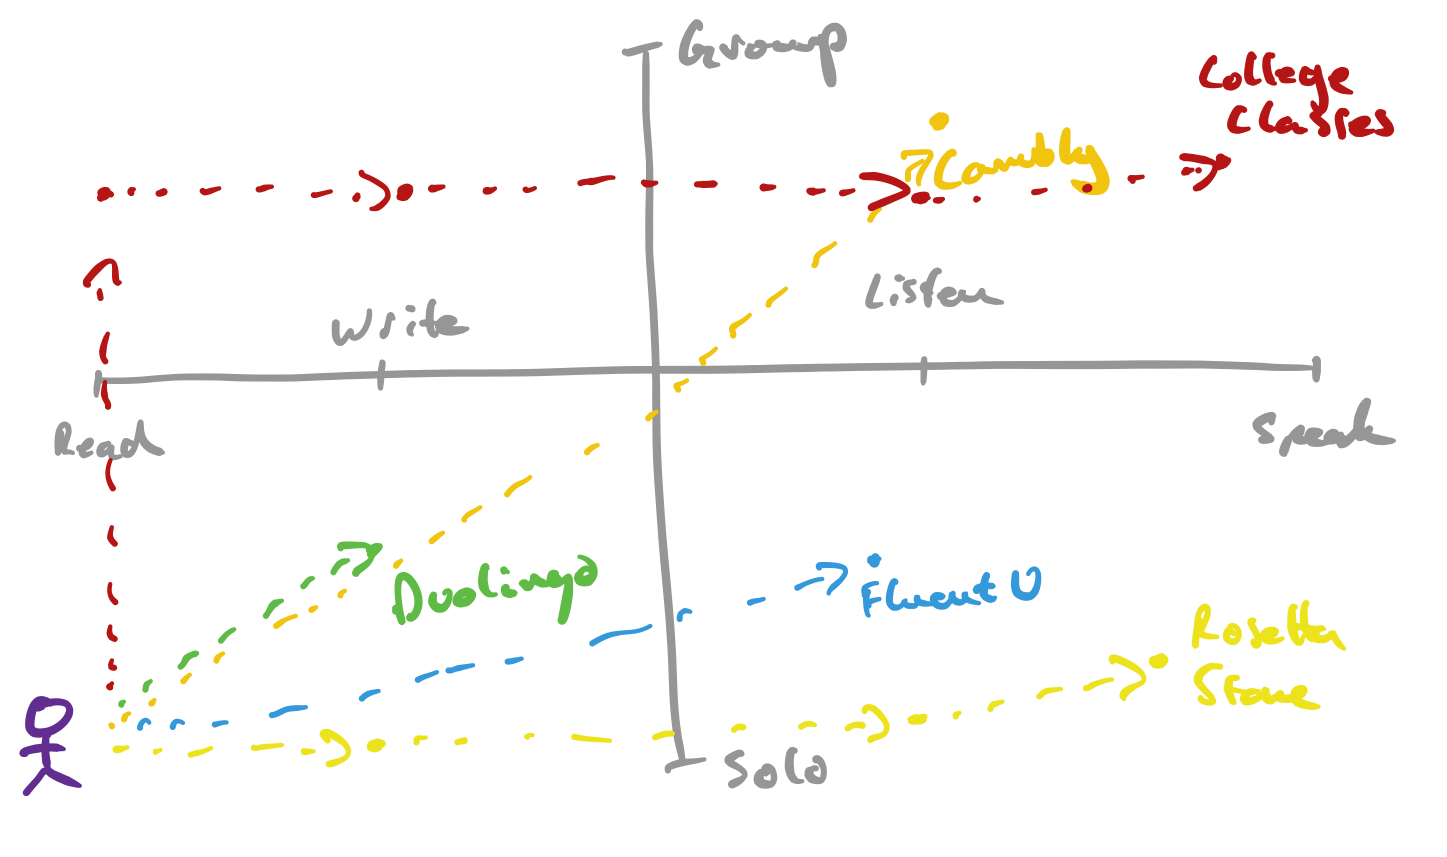 Hand-drawn 2-axis chart. X-axis shows Read, Write, Listen, and Speak going left to right; Y-axis shows Group to Solo from top to bottom. Dots on the chart show selected competitors: Duolingo is in the bottom left because they target Write/Solo. FluentU is in the bottom right at Listen/Solo; Rosetta Stone is bottom-right-most at Speak/Solo. College Classes are at the top right with Speak/Group. There is a stick-figure in the bottom left, which symbolizes a beginner language learner. Dotted arrows connect the stick-figure to each of the dots. For College Classes, the dotted arrow makes stops at Read/Group, Write/Group, Listen/Group, before ending at Speak/Group. For Rosetta Stone, the dotted arrow makes stops at Read/Solor, Write/Solo, Listen/Solo, and ends at Speak/Solo